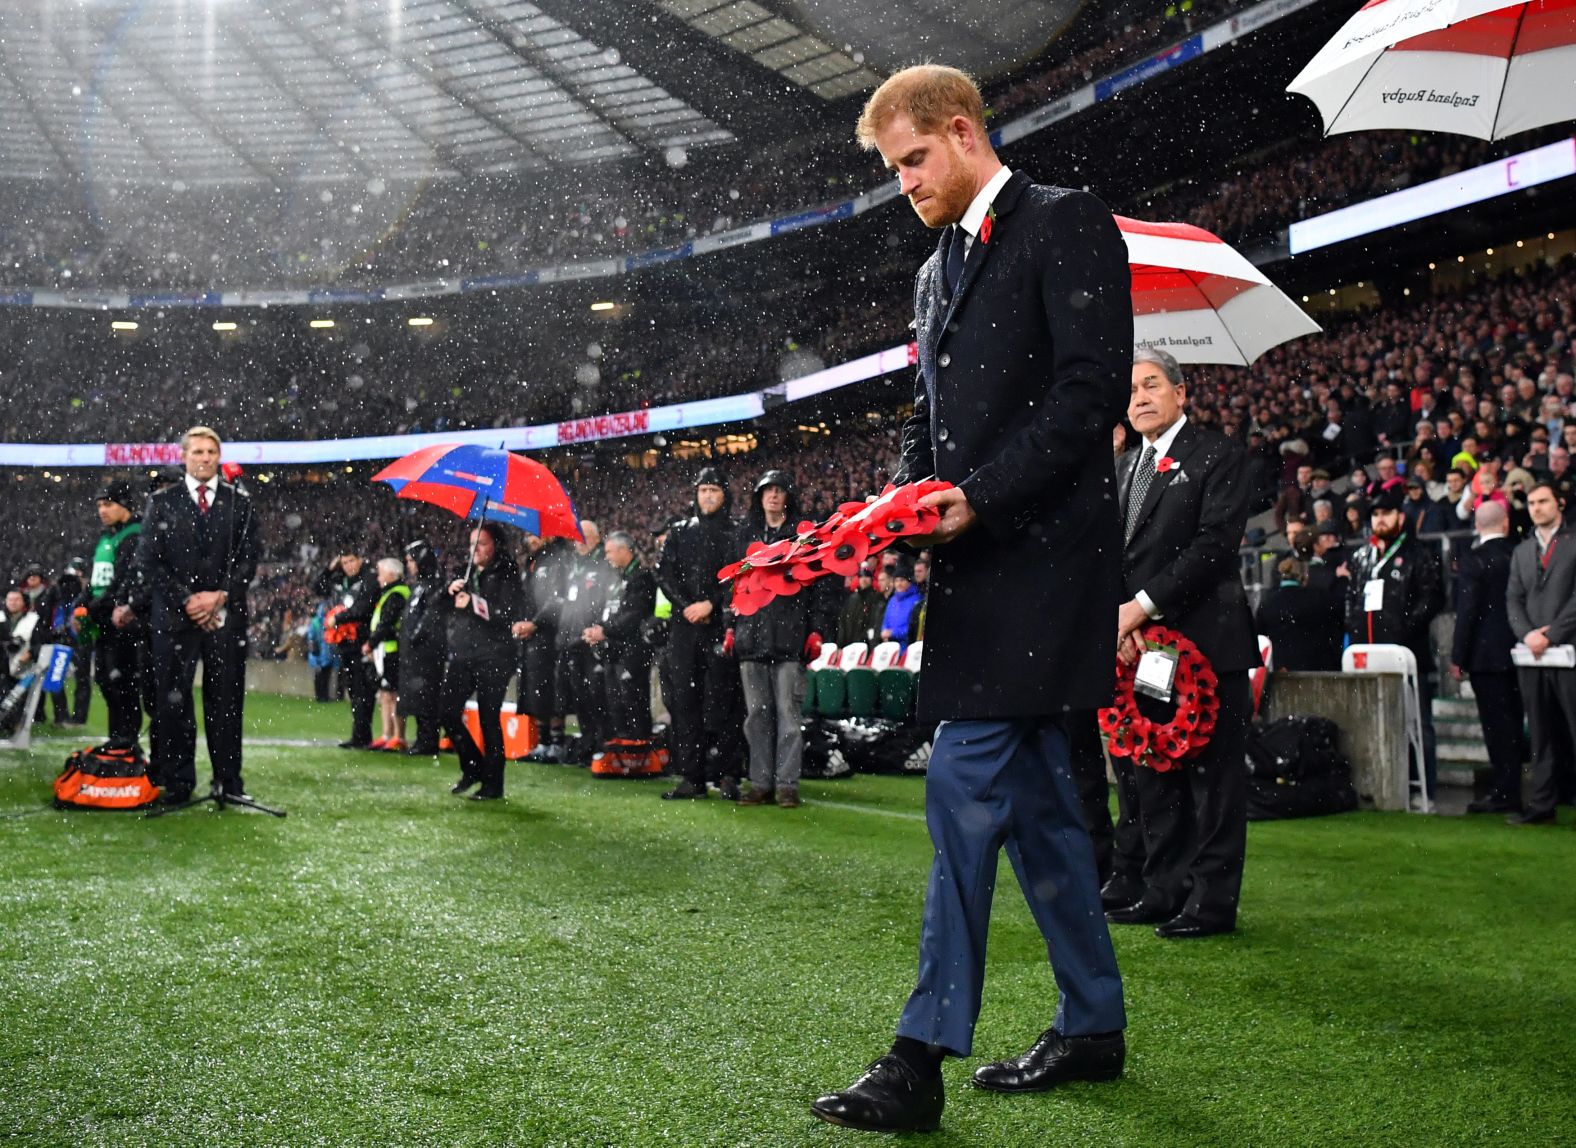 Britain's Prince Harry prepares to lay a wreath before the England and New Zealand rugby match at Twickenham Stadium in London on November 10.